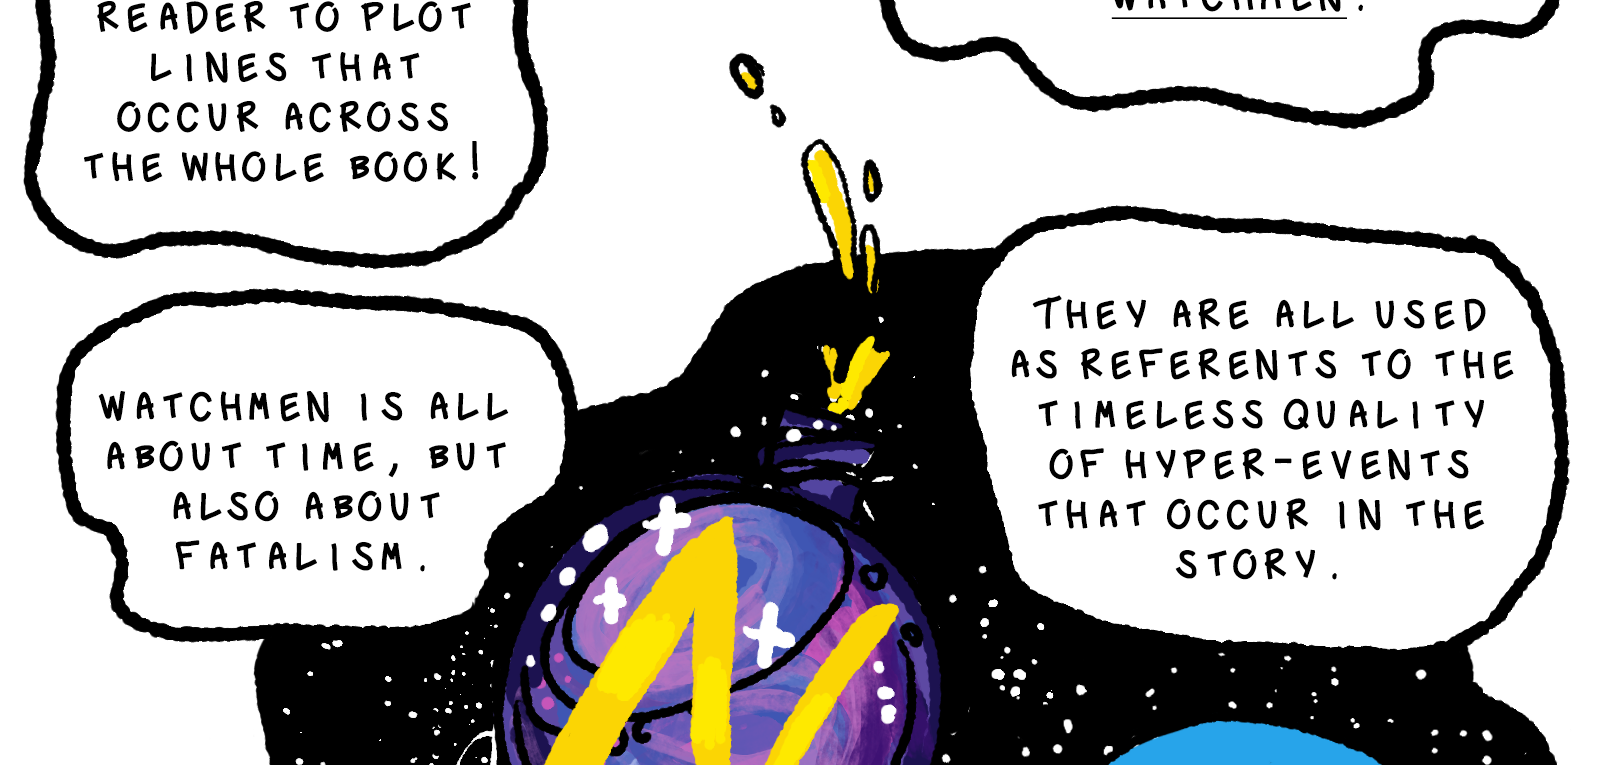 Hanging in space is a blobby, roughly-circular cutout of outer space. Hanging in front of it is a purple and gold bottle of perfume being spilled but frozen in time, a recurring image from the Watchmen comic book. The narration continues: These leitmotifs are all used as referents to the timeless quality of the hyper-events that occur in the story. Watchmen is all about time, but also about fatalism.